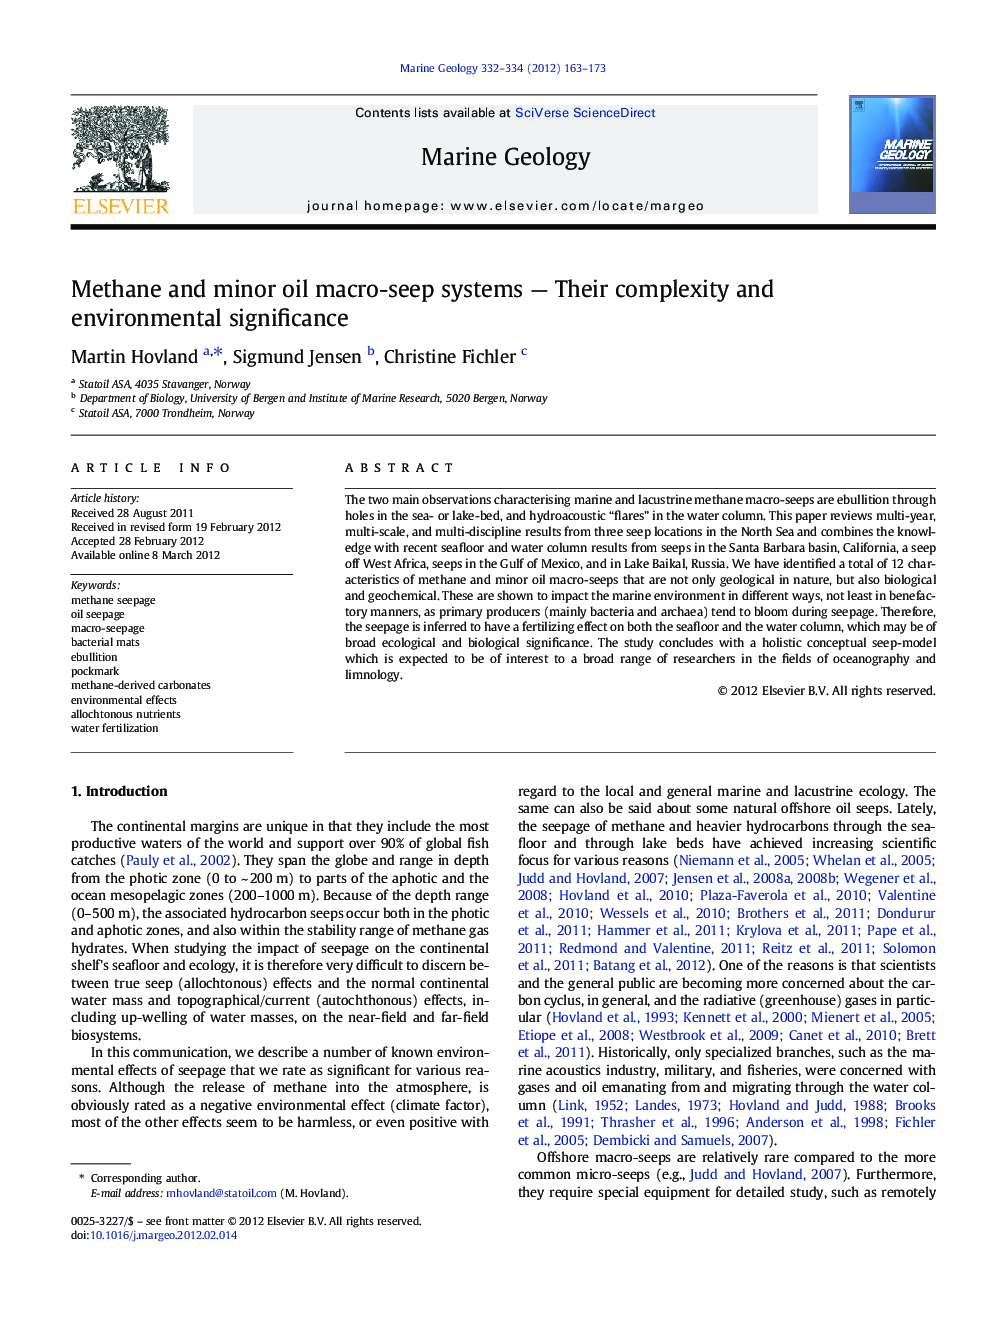 Methane and minor oil macro-seep systems — Their complexity and environmental significance